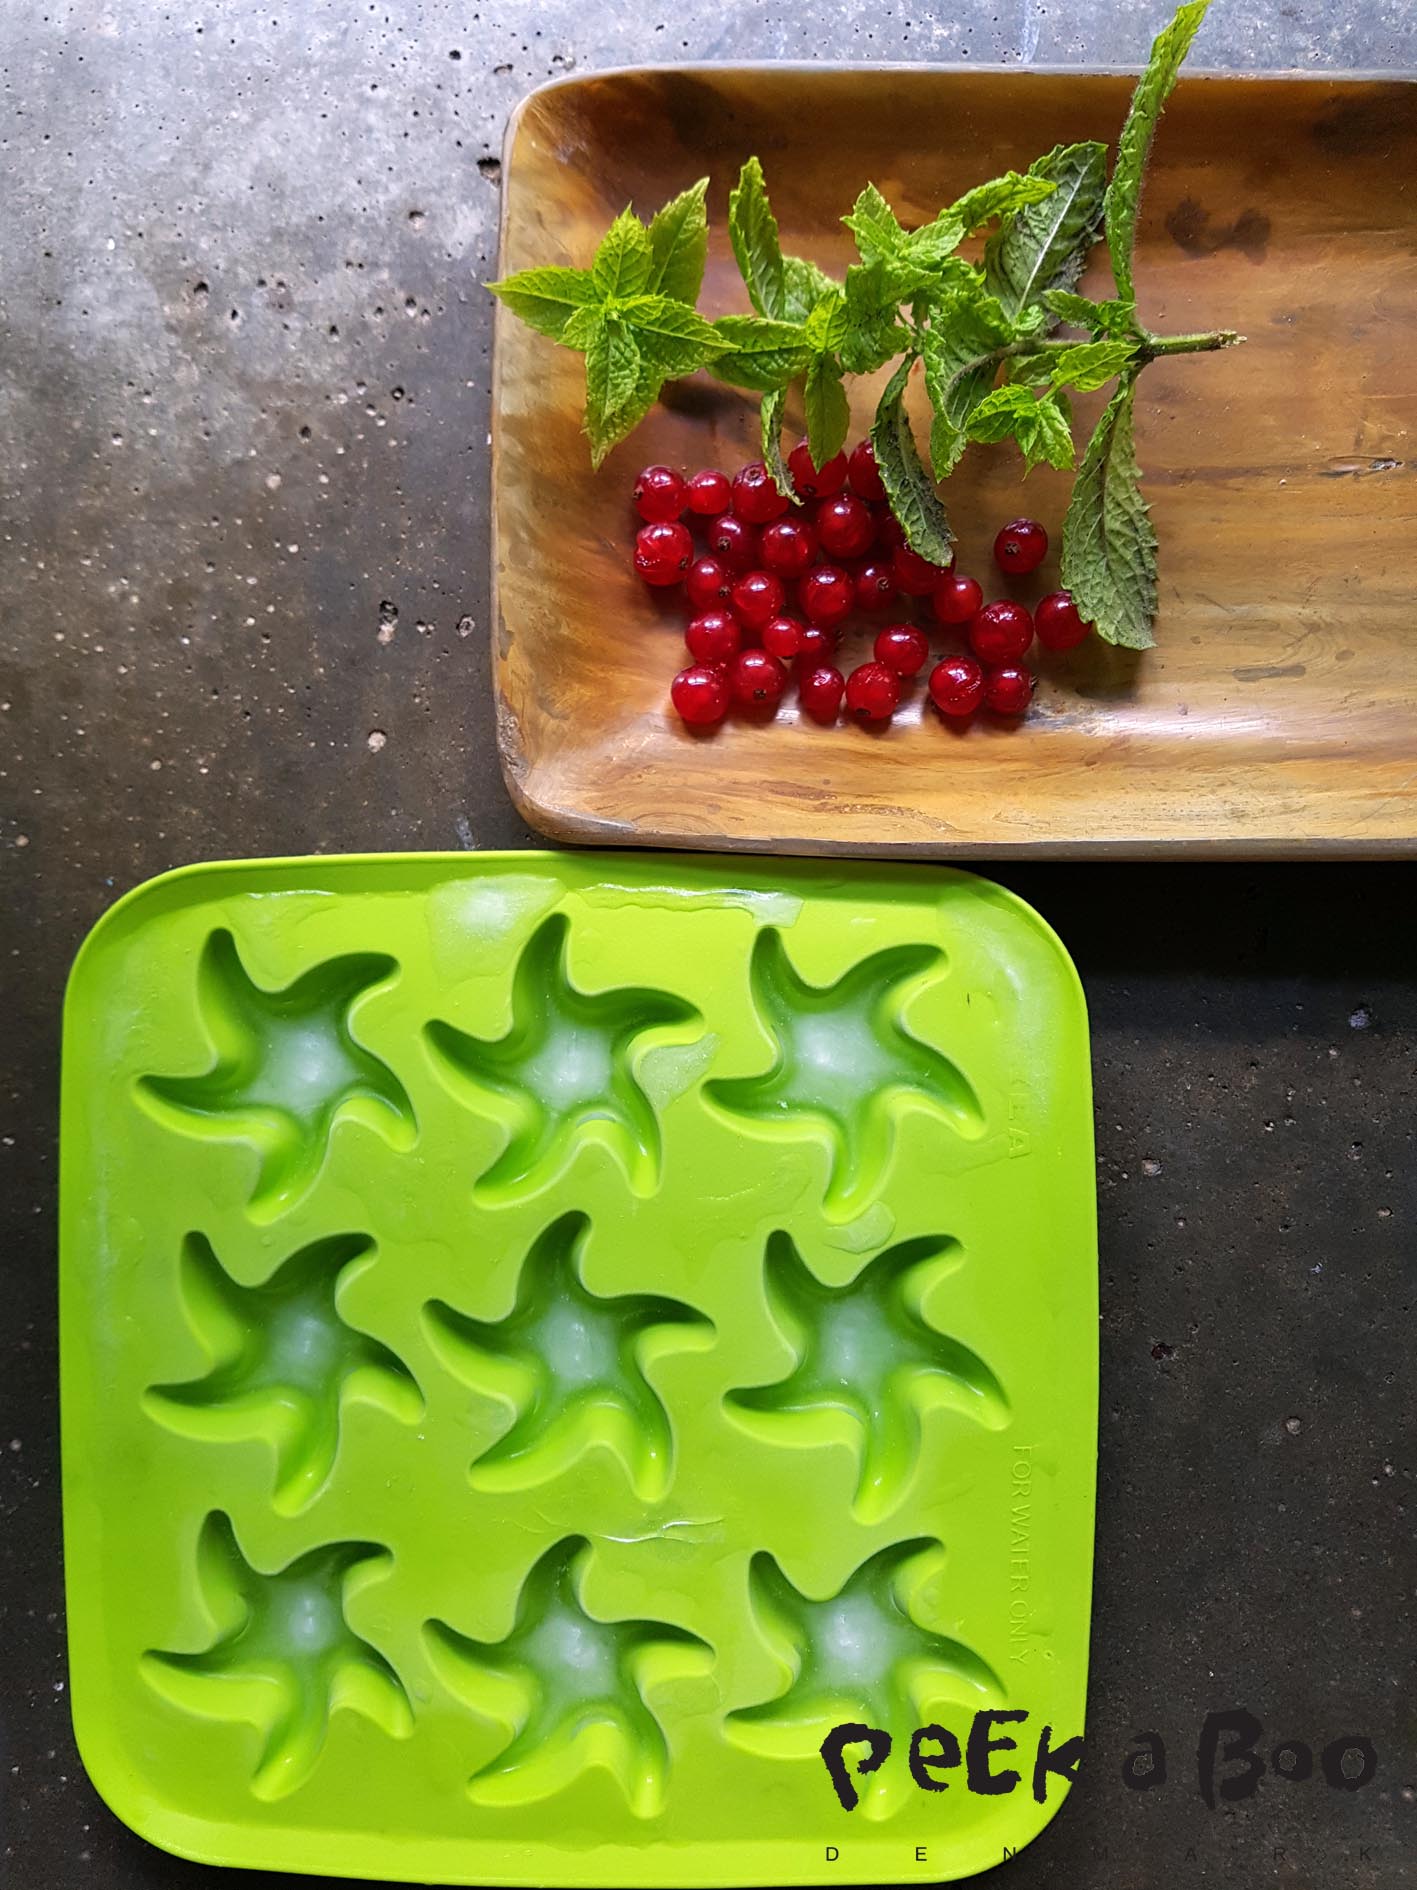 Freeze the botom of the icecubes. Use small berries and mint leaves.